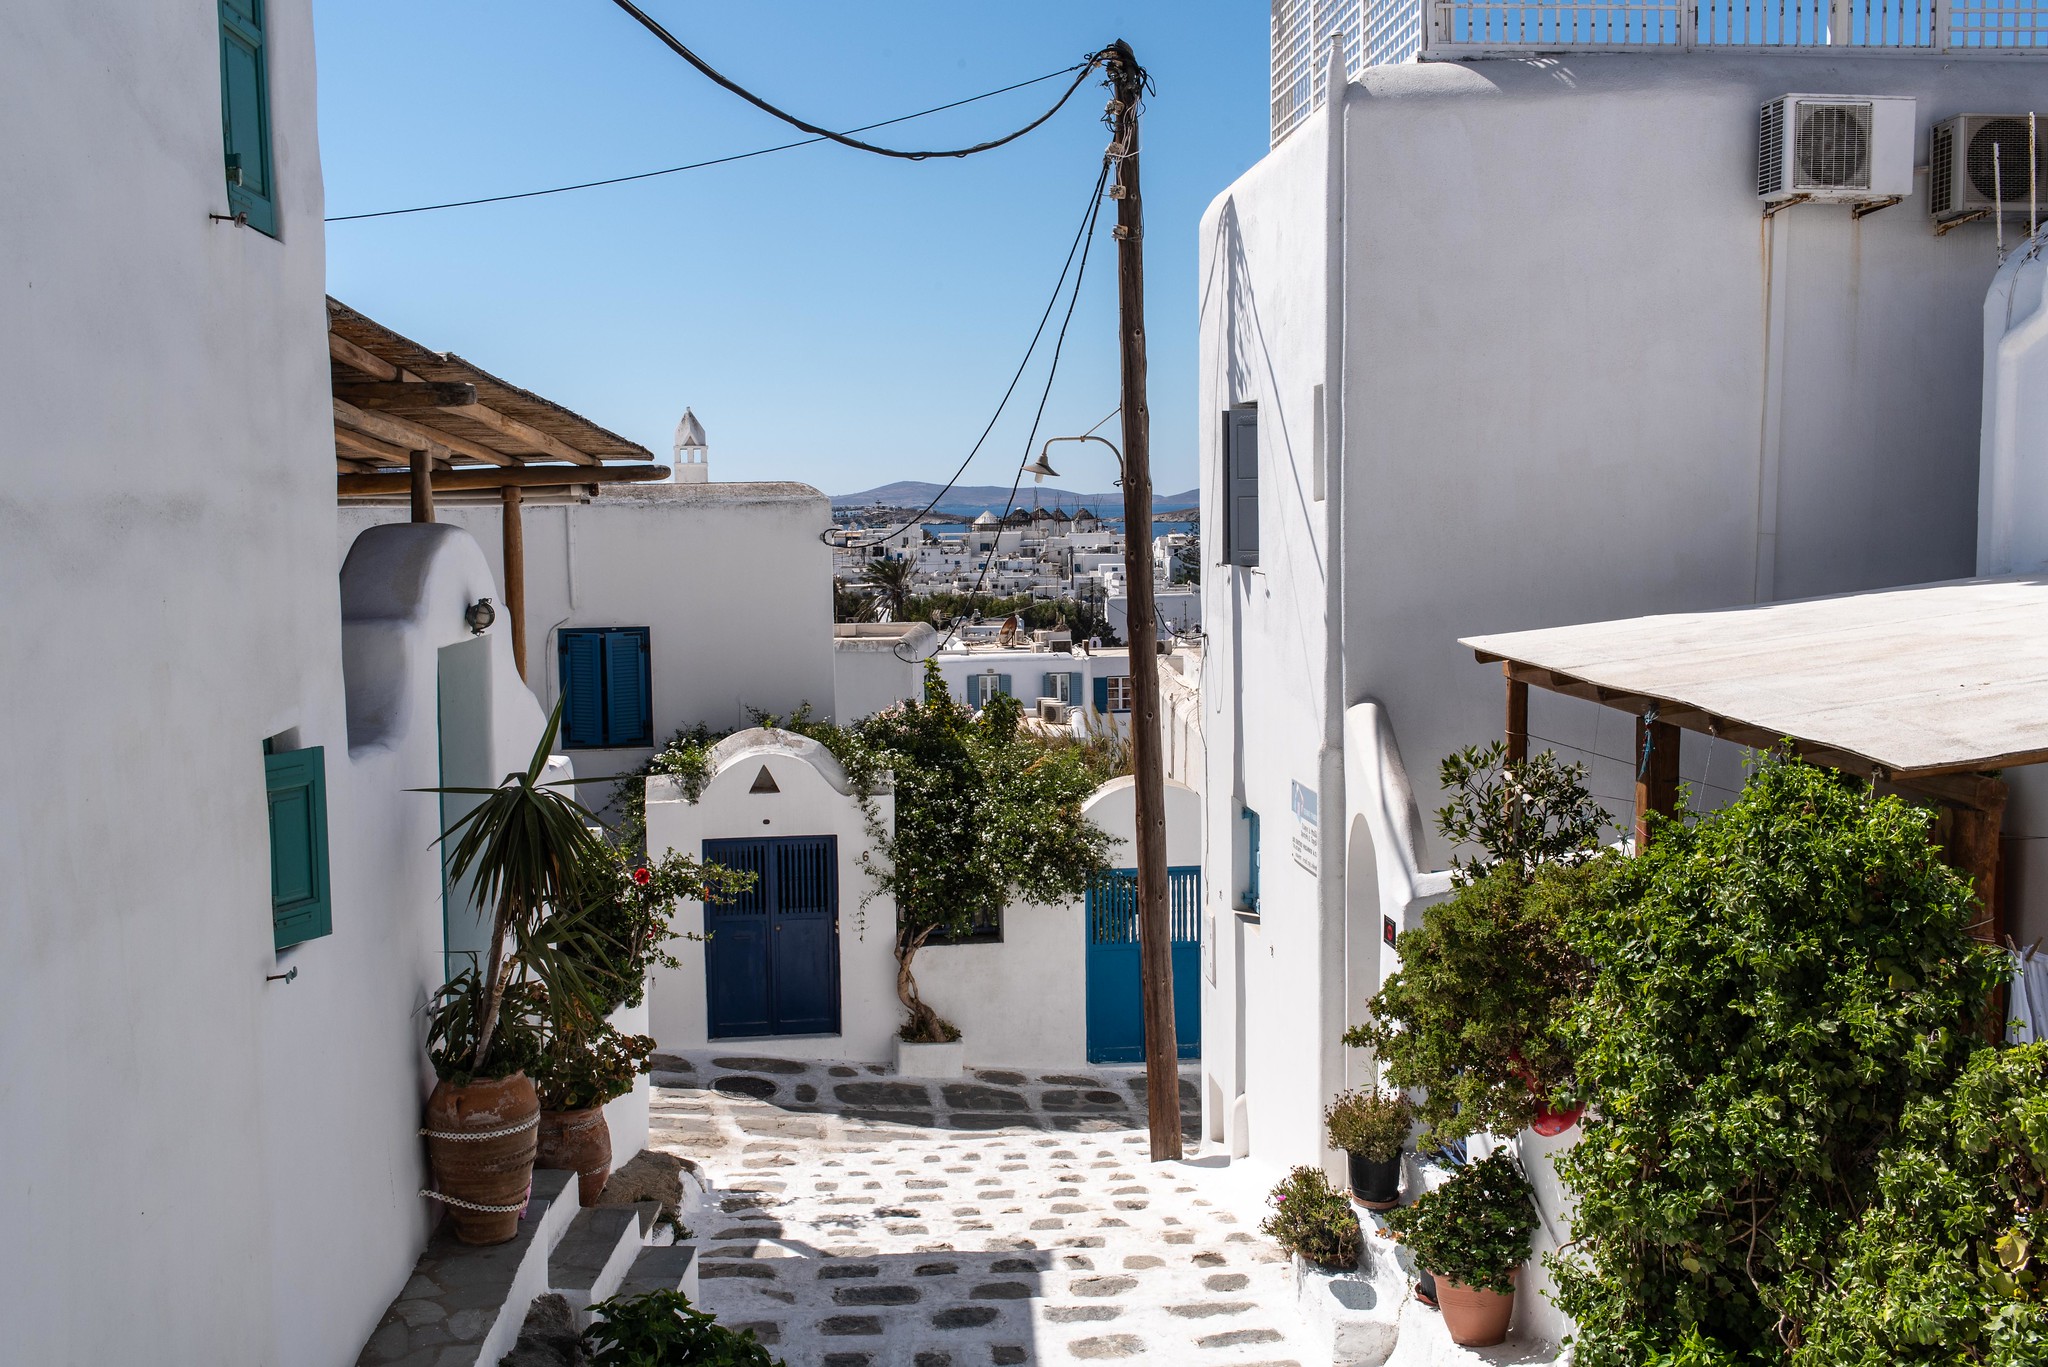 Mykonos alleyway with white houses and plants